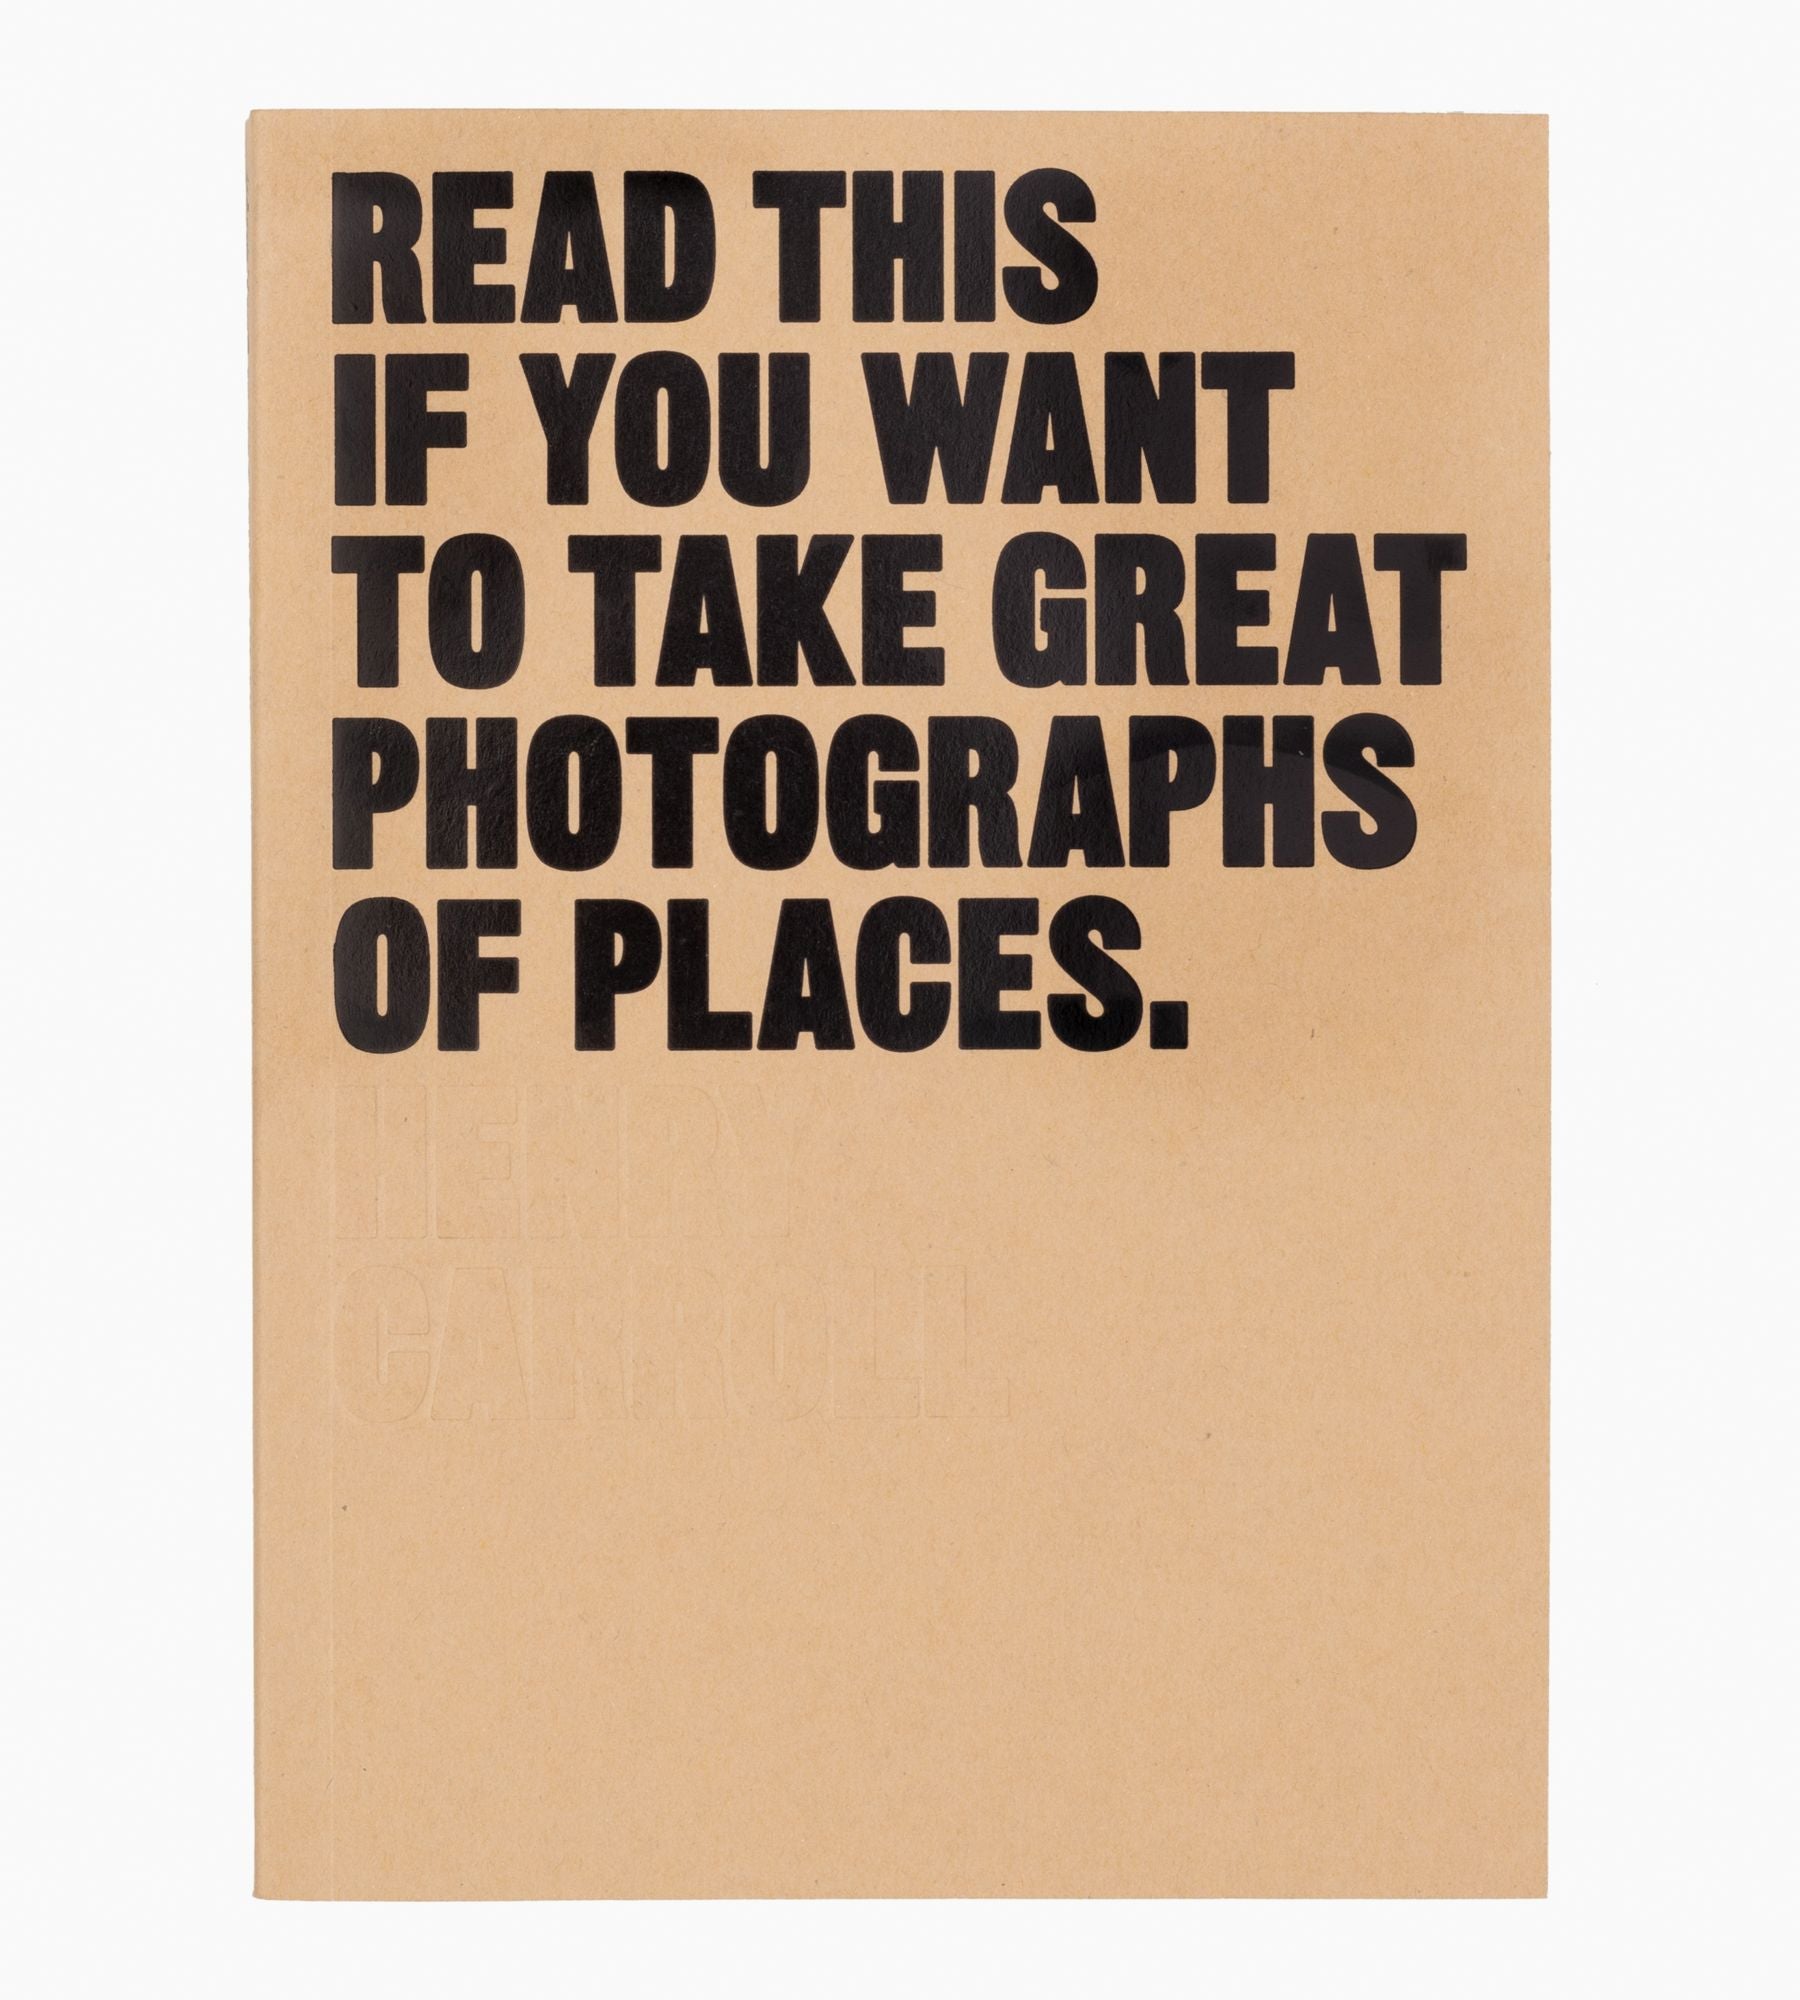 'Read this if you want to take great photographs of places' book